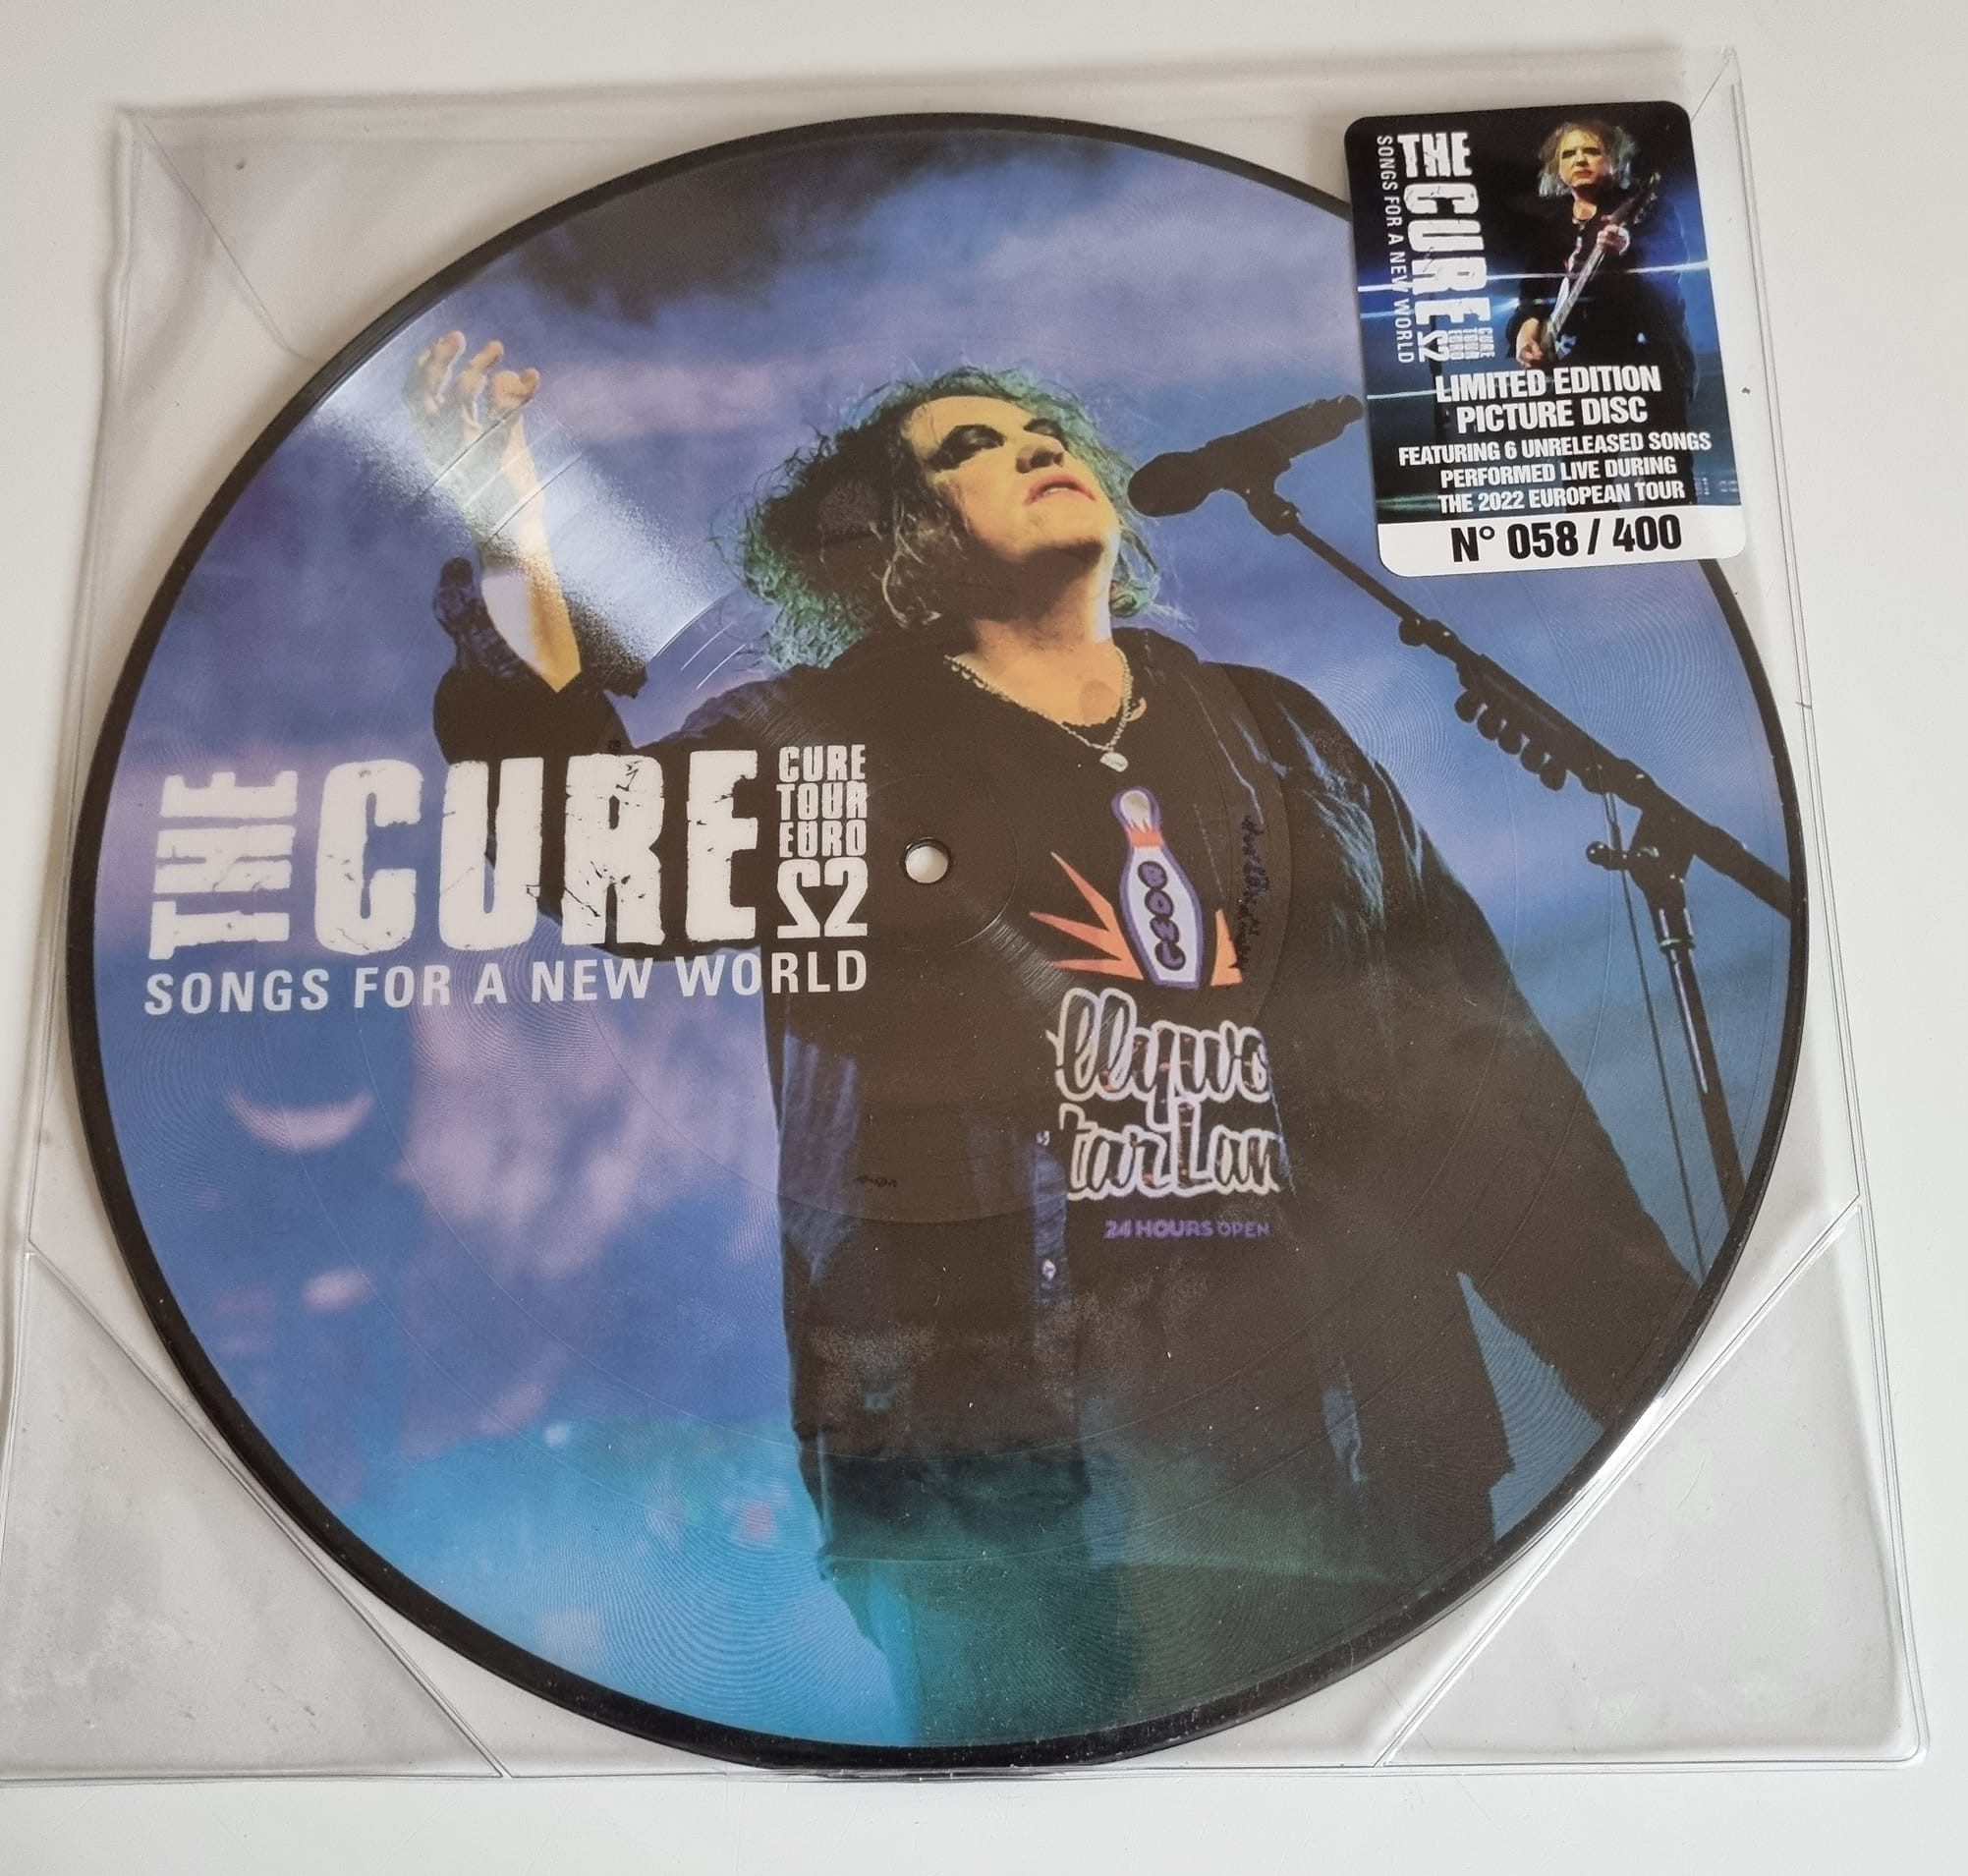 Buy this rare Cure Record by clicking here